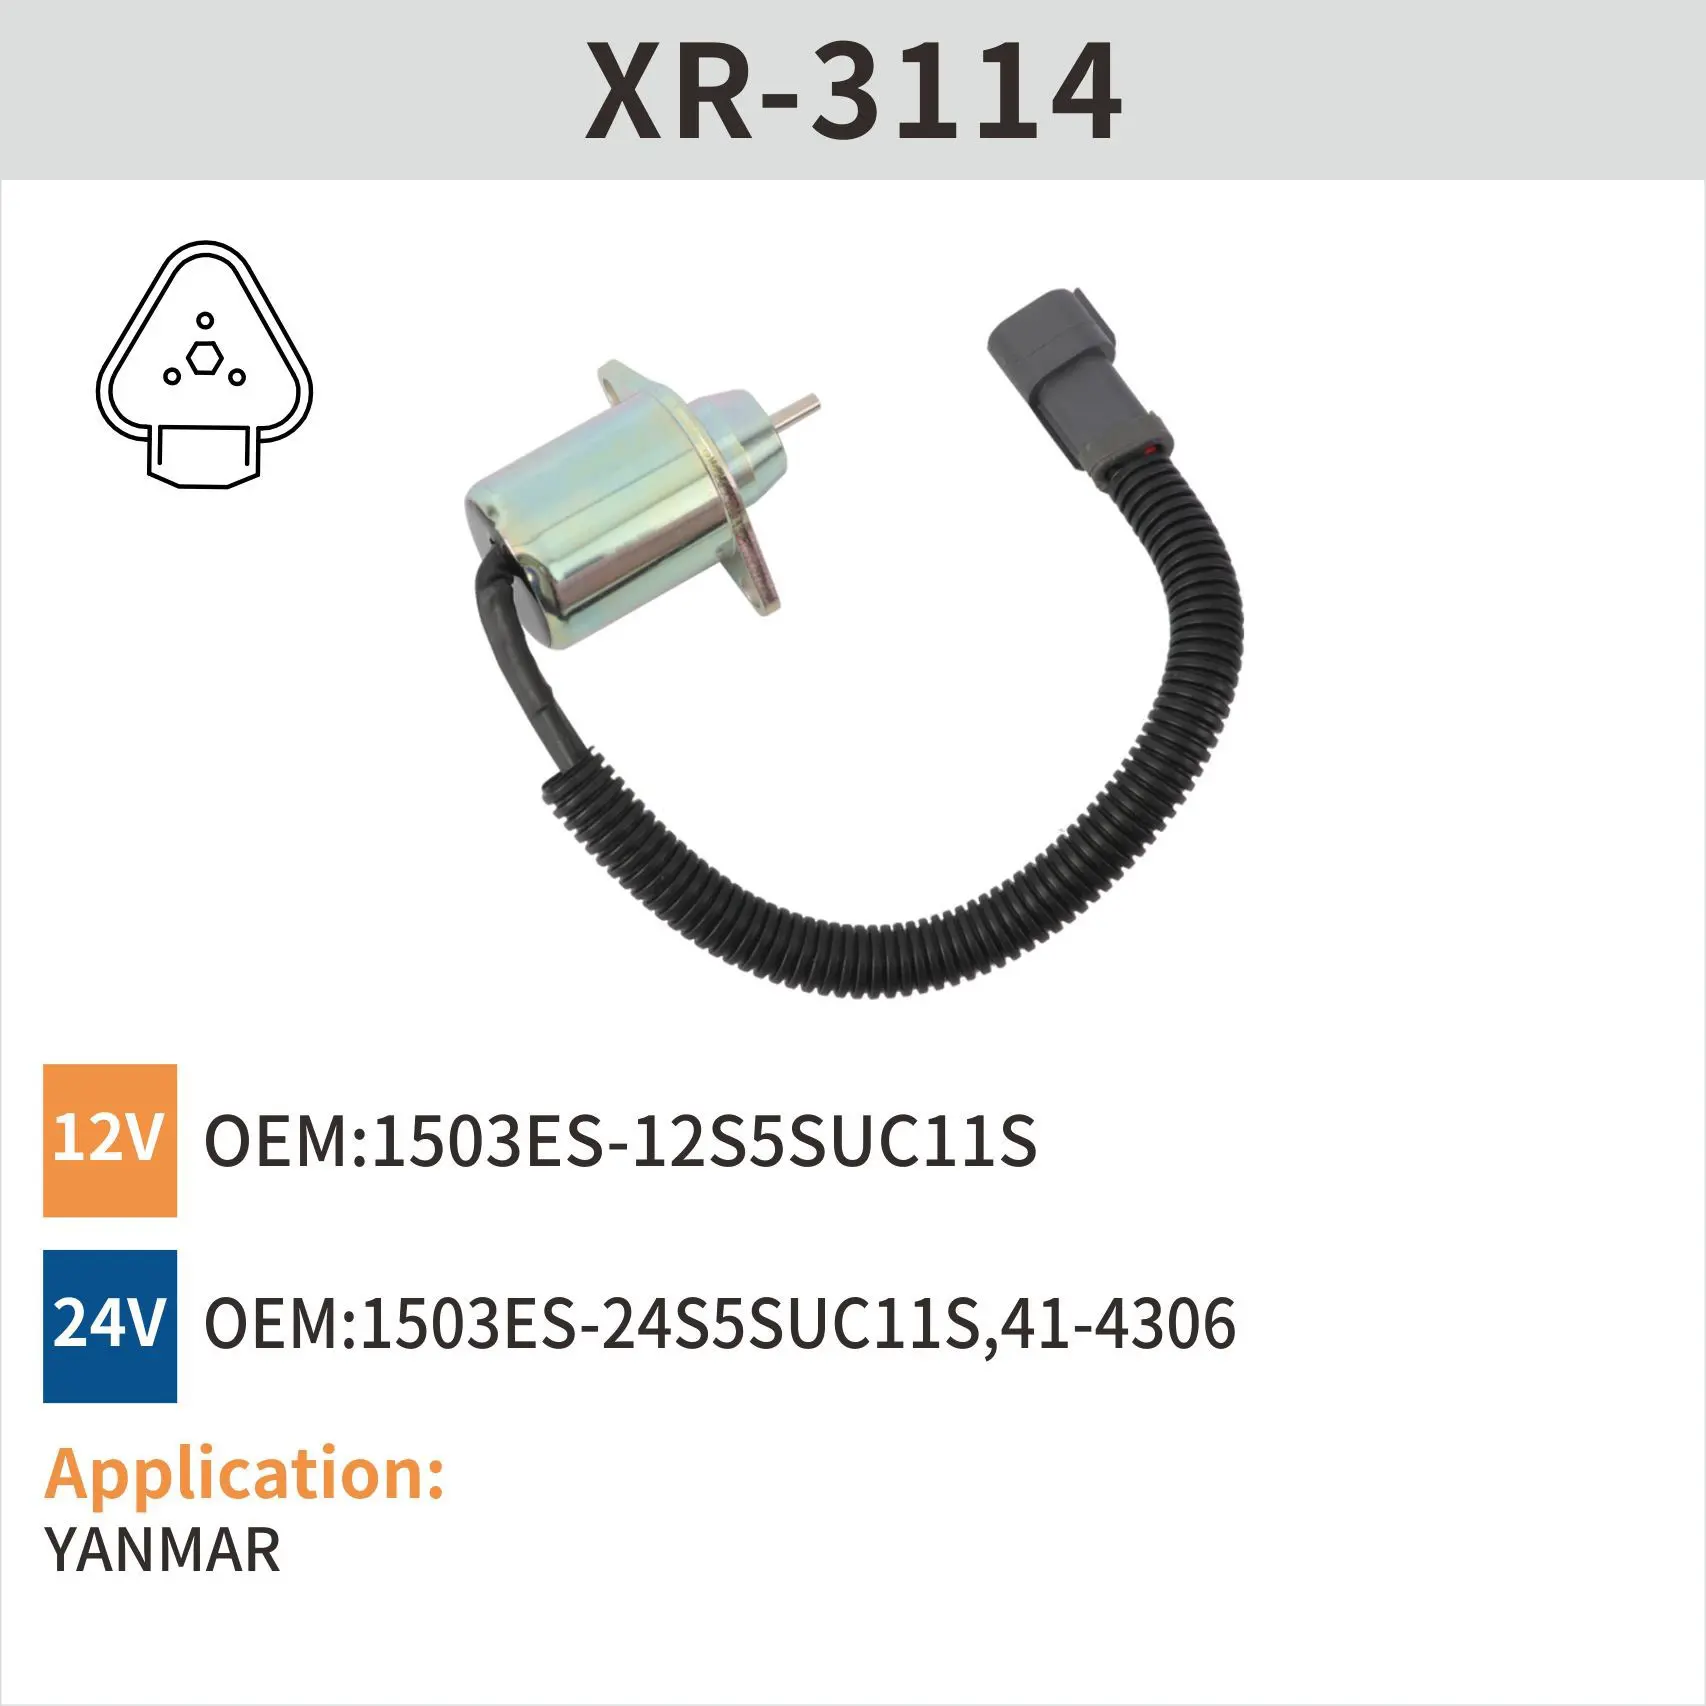 1503ES-12S5SUC11 Stop Solenoid For Yanmar Thermo King 12V